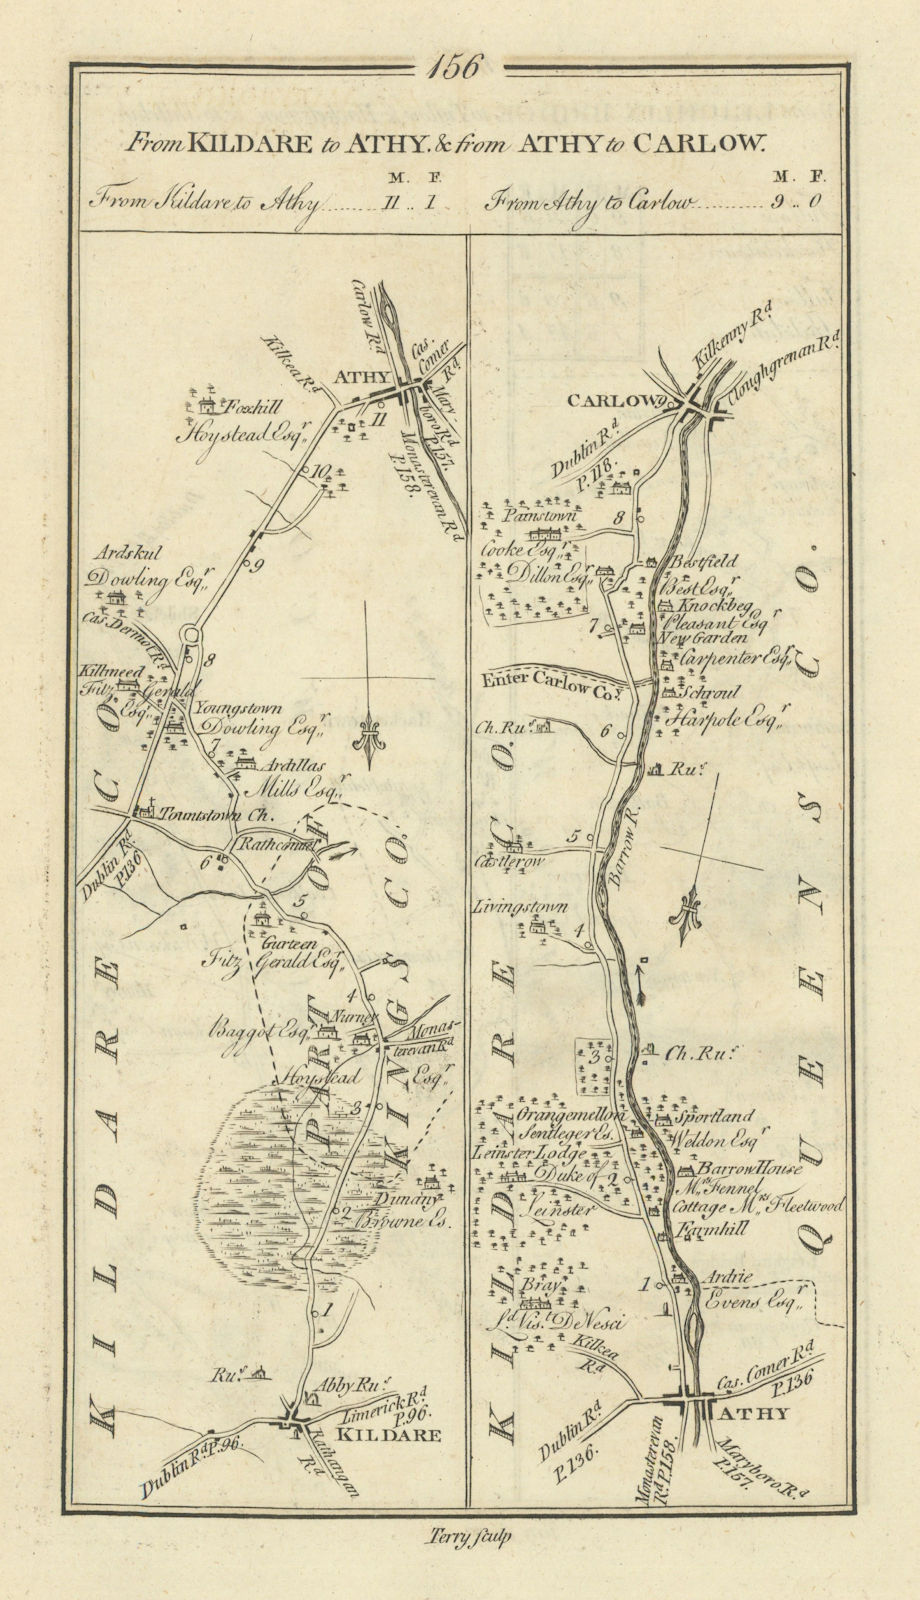 Associate Product #156 Kildare to Athy & Athy to Carlow. TAYLOR/SKINNER 1778 old antique map